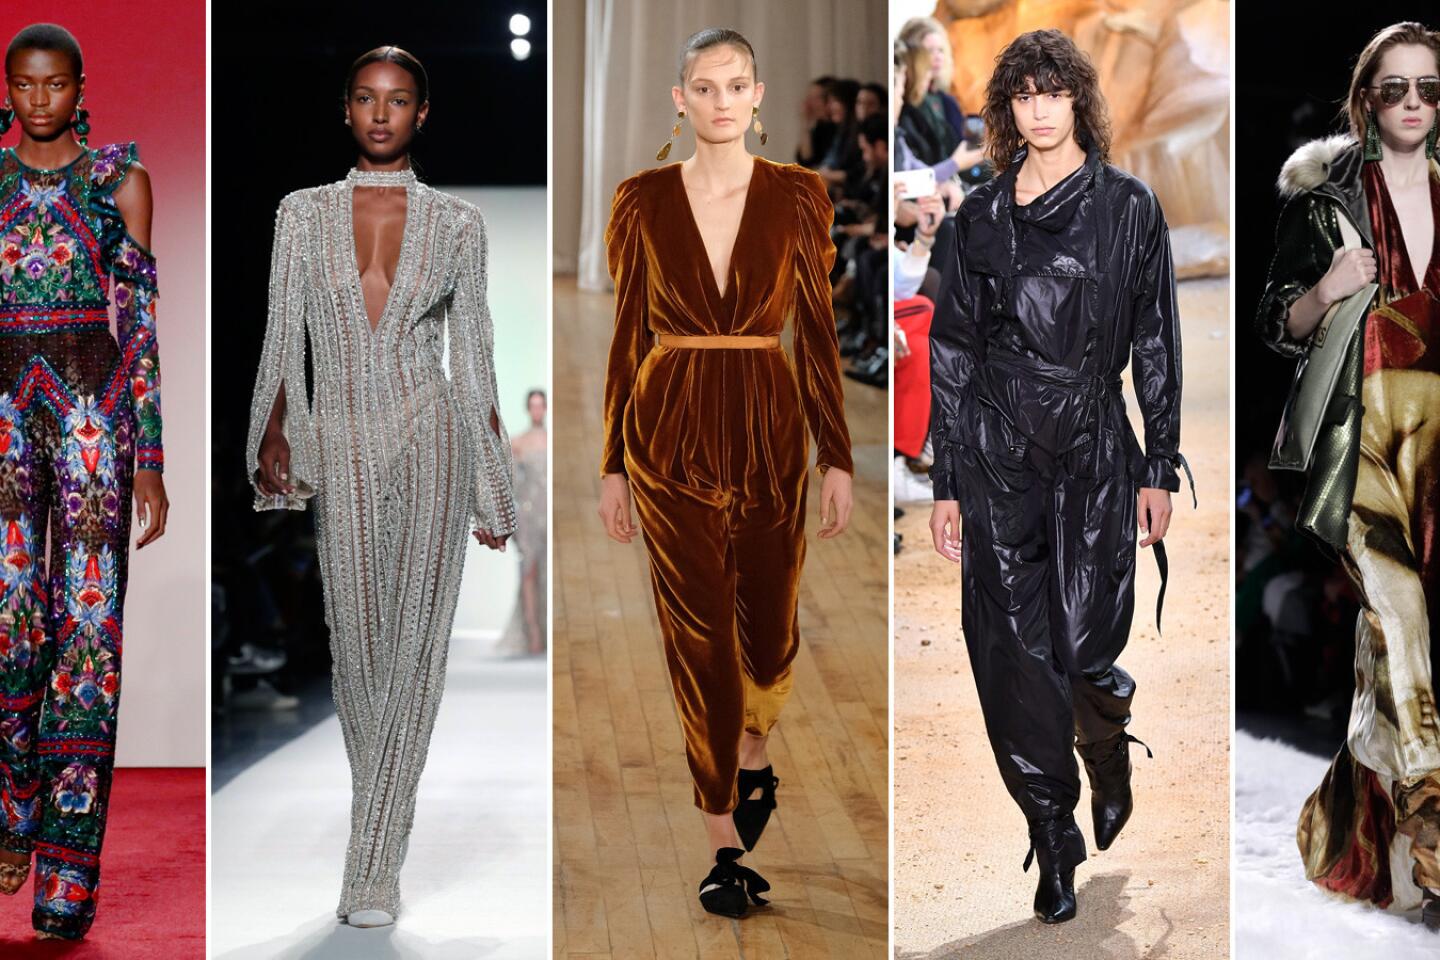 5 major fashion trends you should know about for fall and winter - Los ...